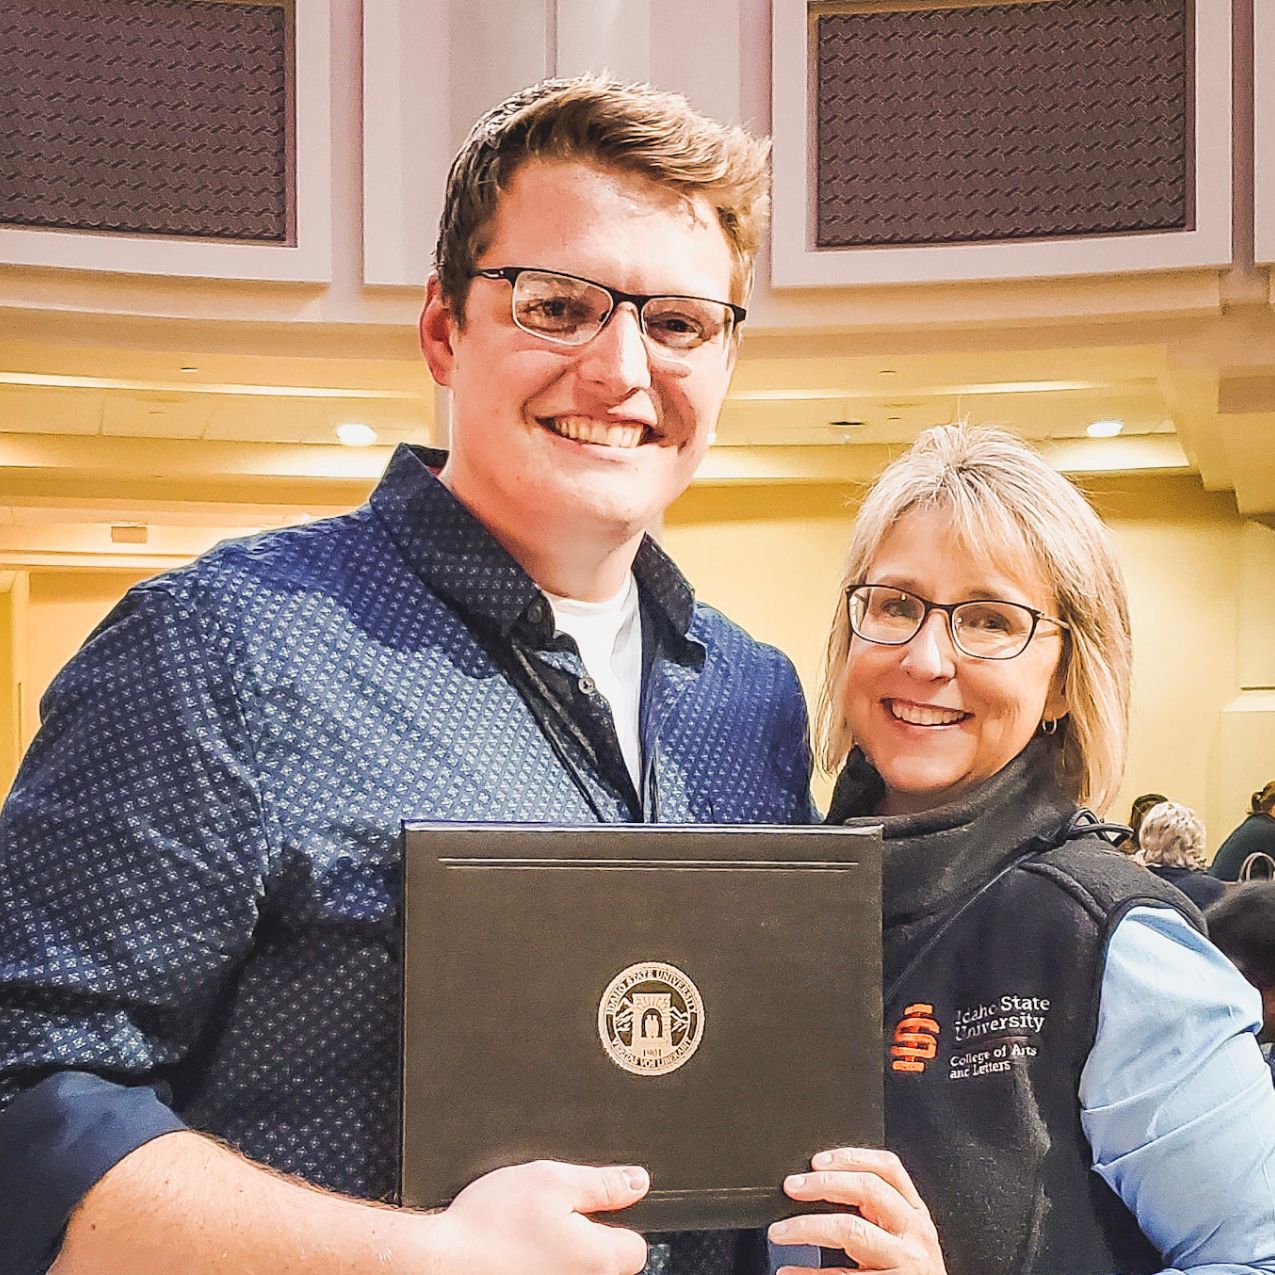 Jacob Harris, graduate student in Sociology, poses with his 3 minute thesis awards alongside the dean of the College of Arts and Letters, Kandi Turley-Ames